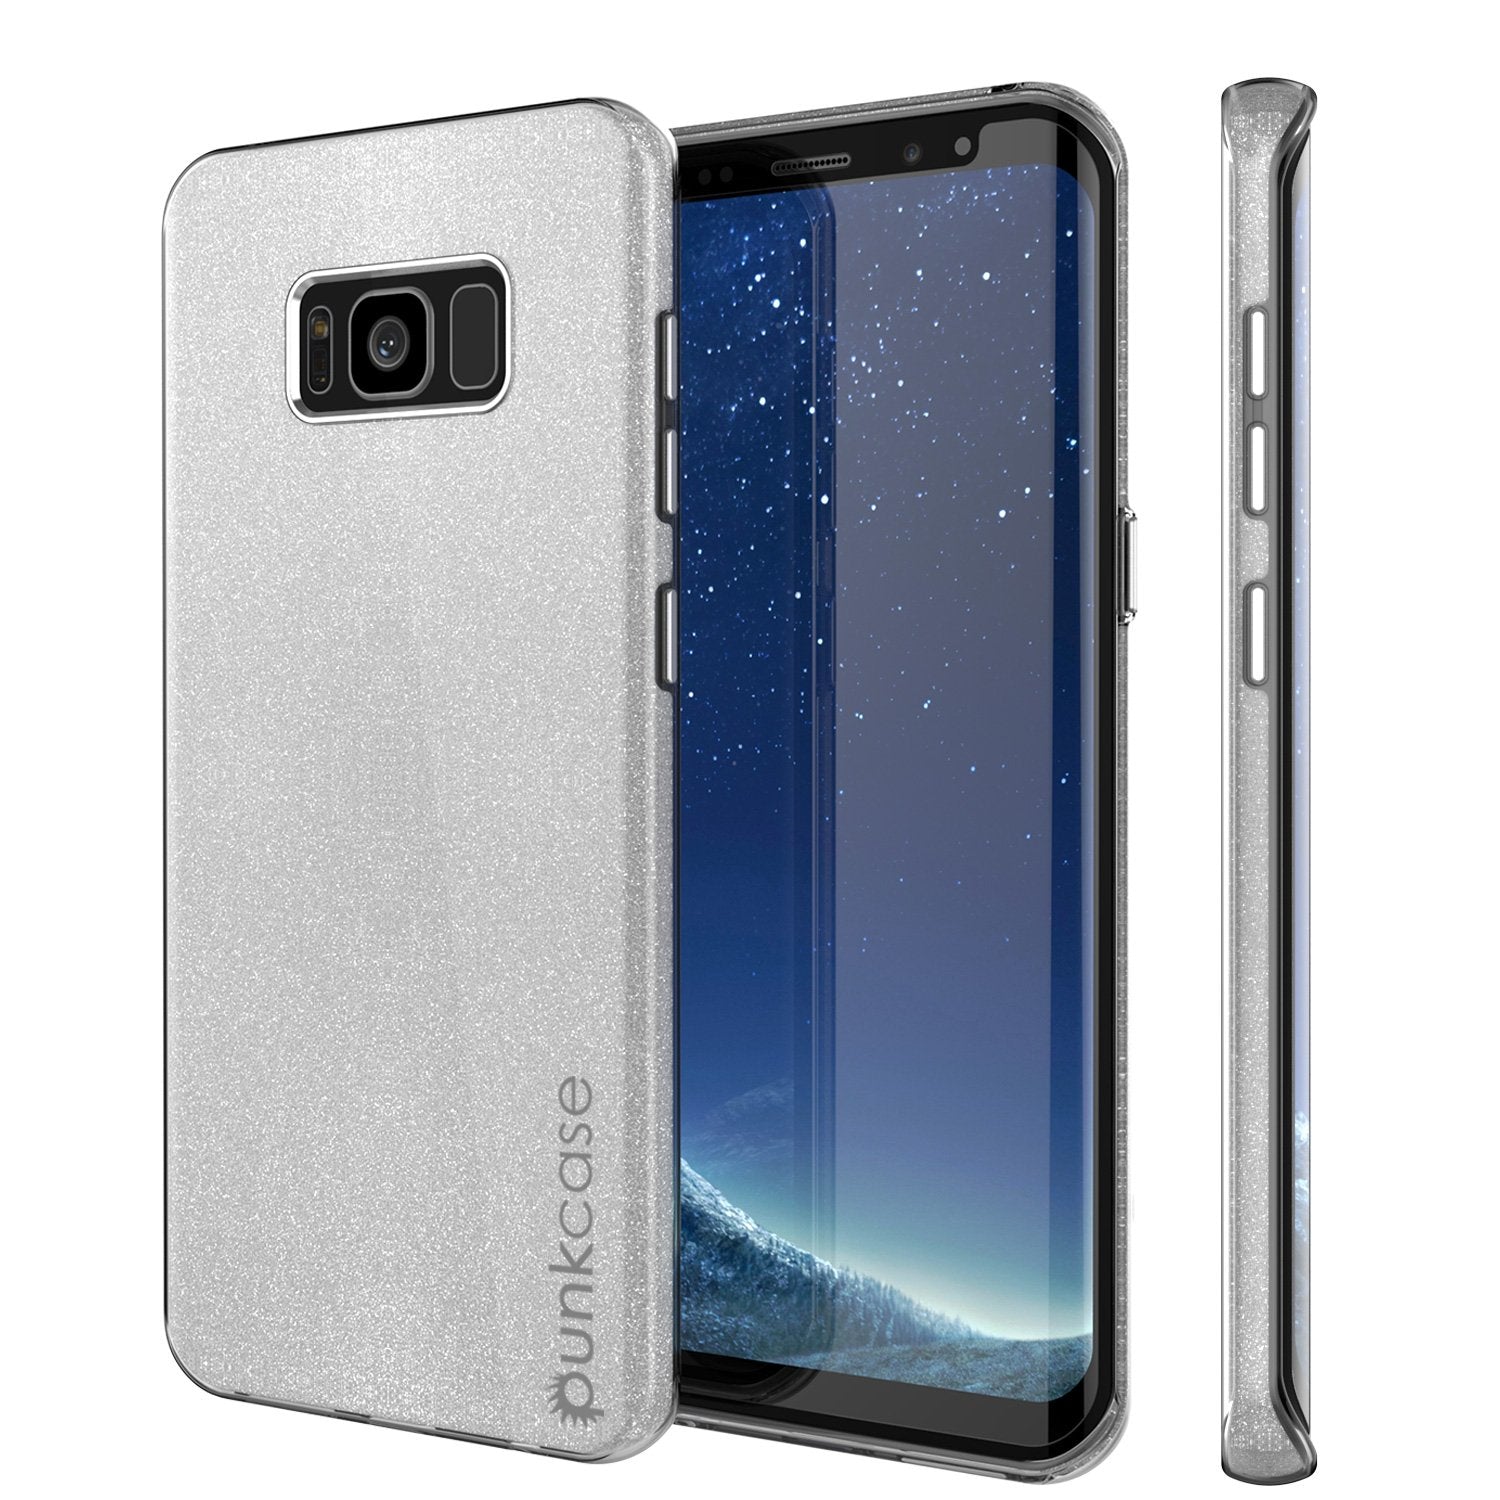 Galaxy S8 Case, Punkcase Galactic 2.0 Series Ultra Slim Protective Armor TPU Cover w/ PunkShield Screen Protector | Lifetime Exchange Warranty | Designed for Samsung Galaxy S8 [Silver]